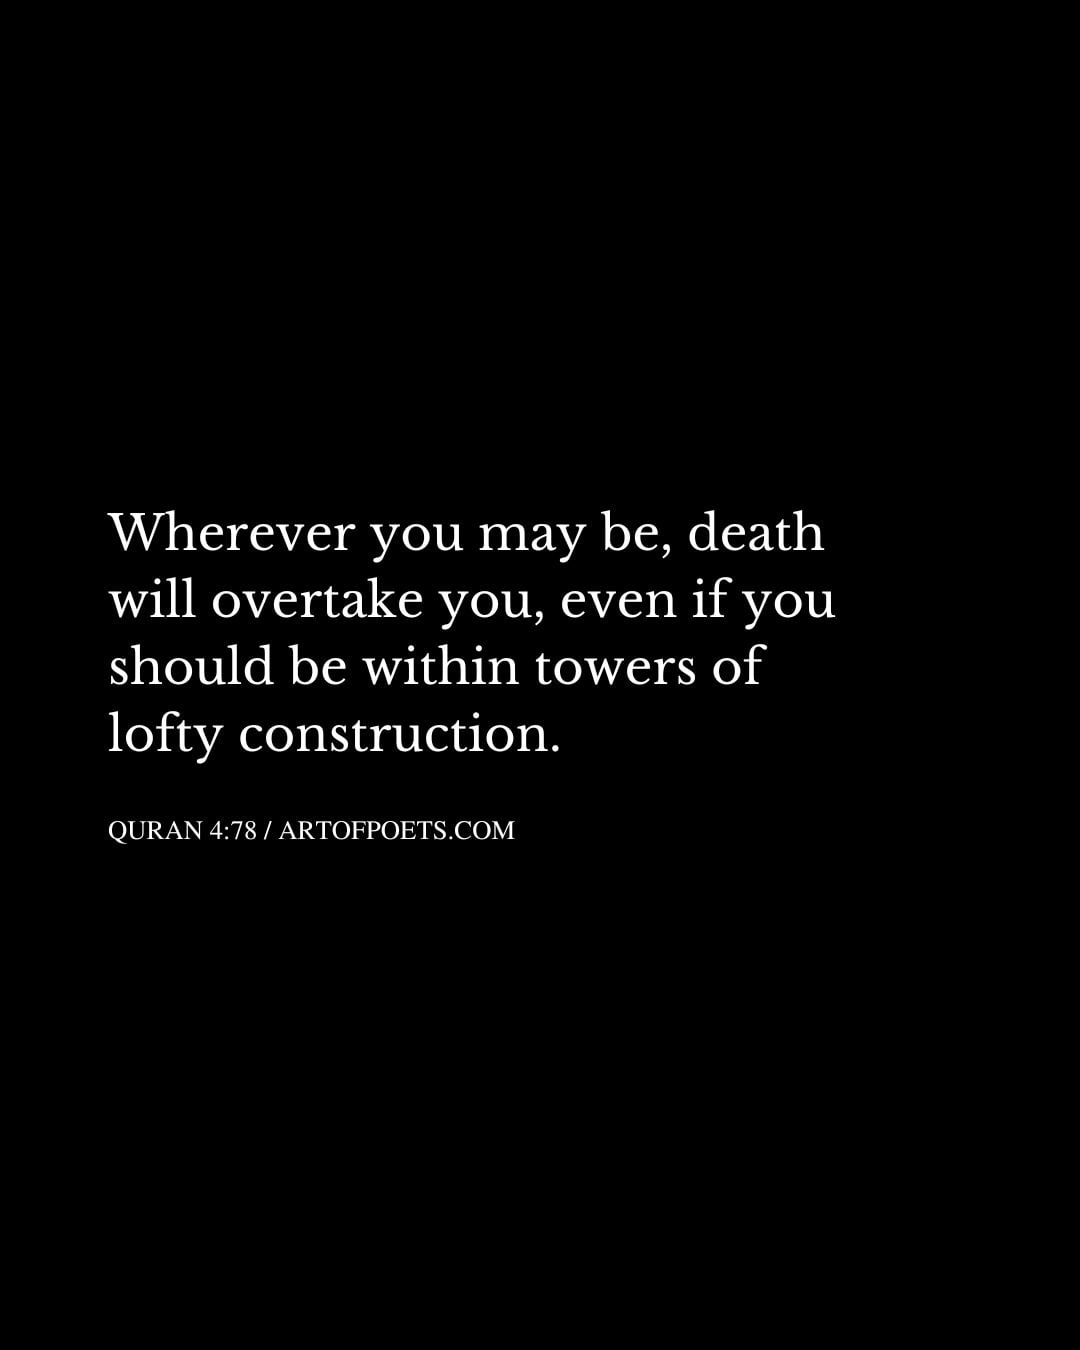 Wherever you may be death will overtake you even if you should be within towers of lofty construction